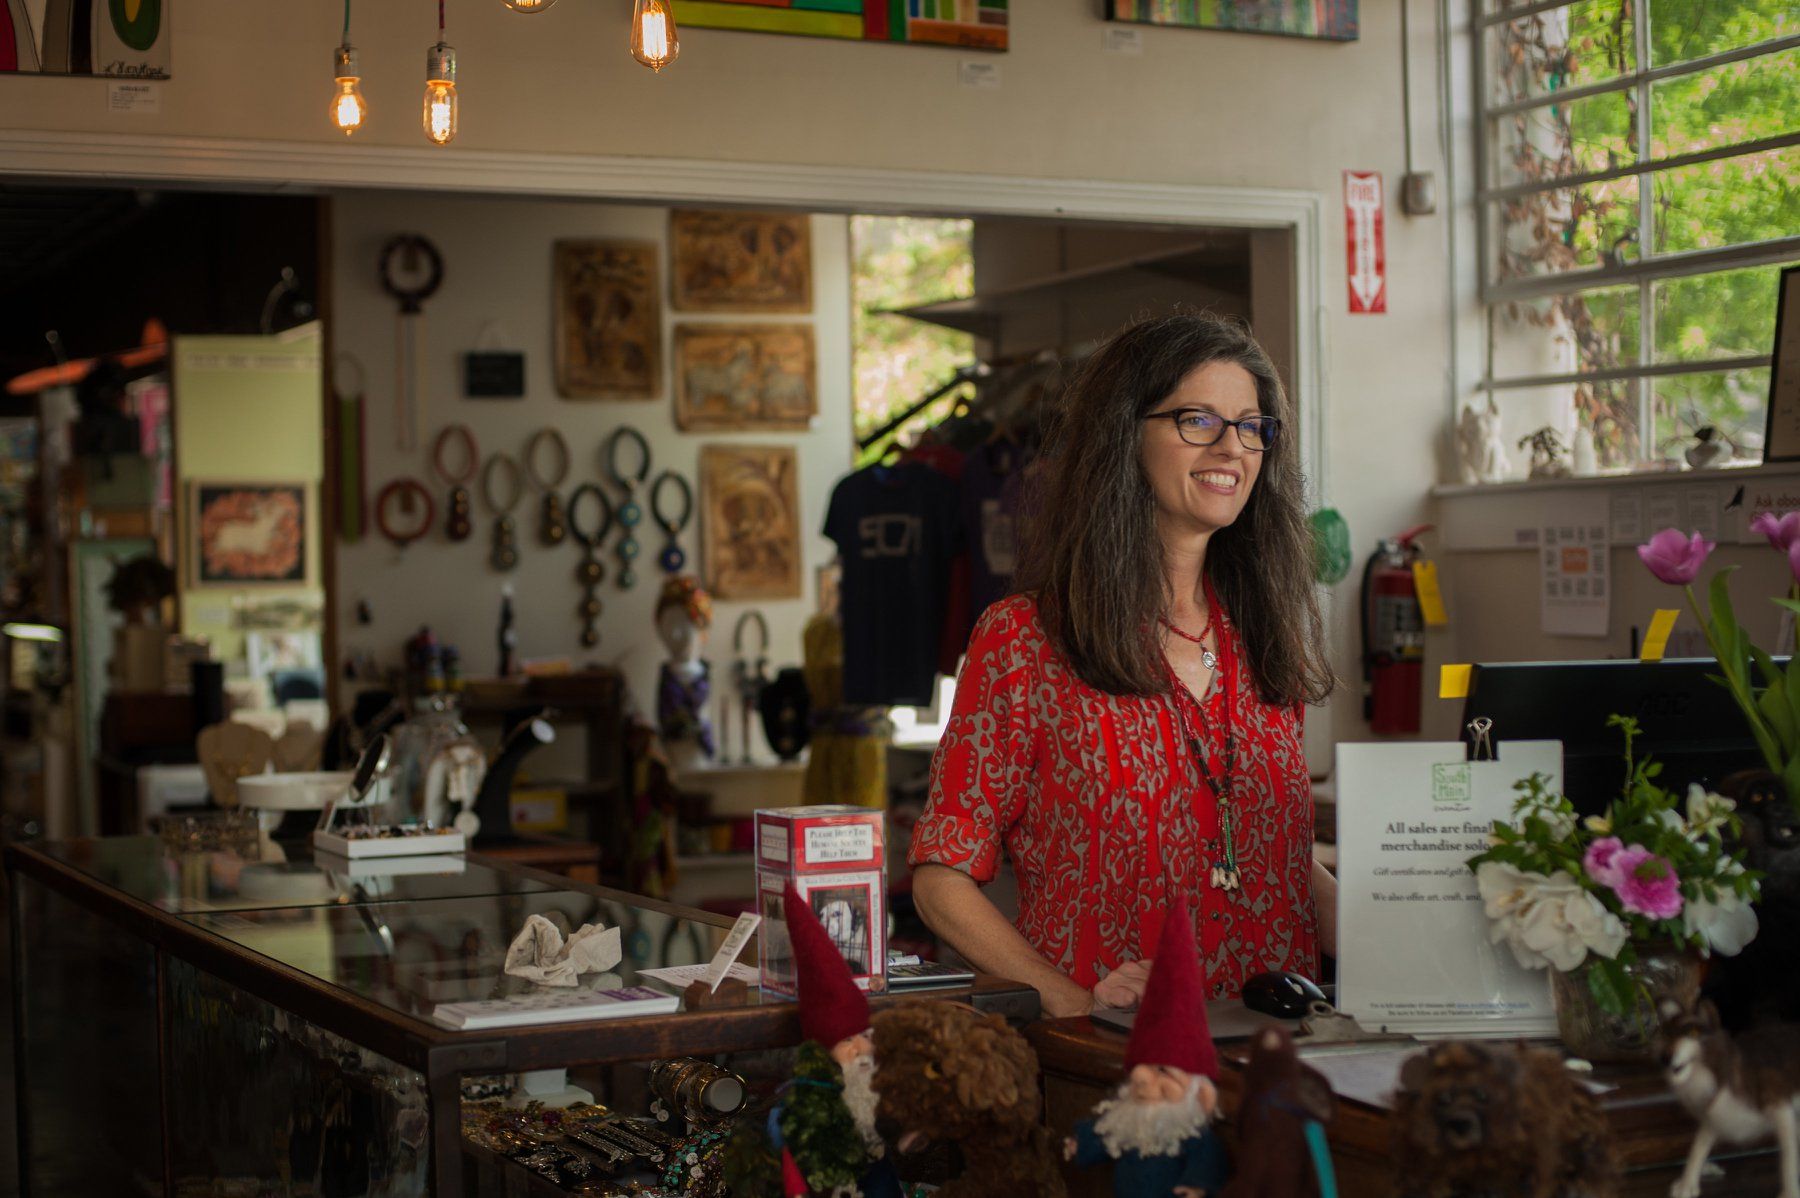 Valerie Wingers stands in the South Main Creative shop in historic SoMa district of Little Rock, Arkansas.